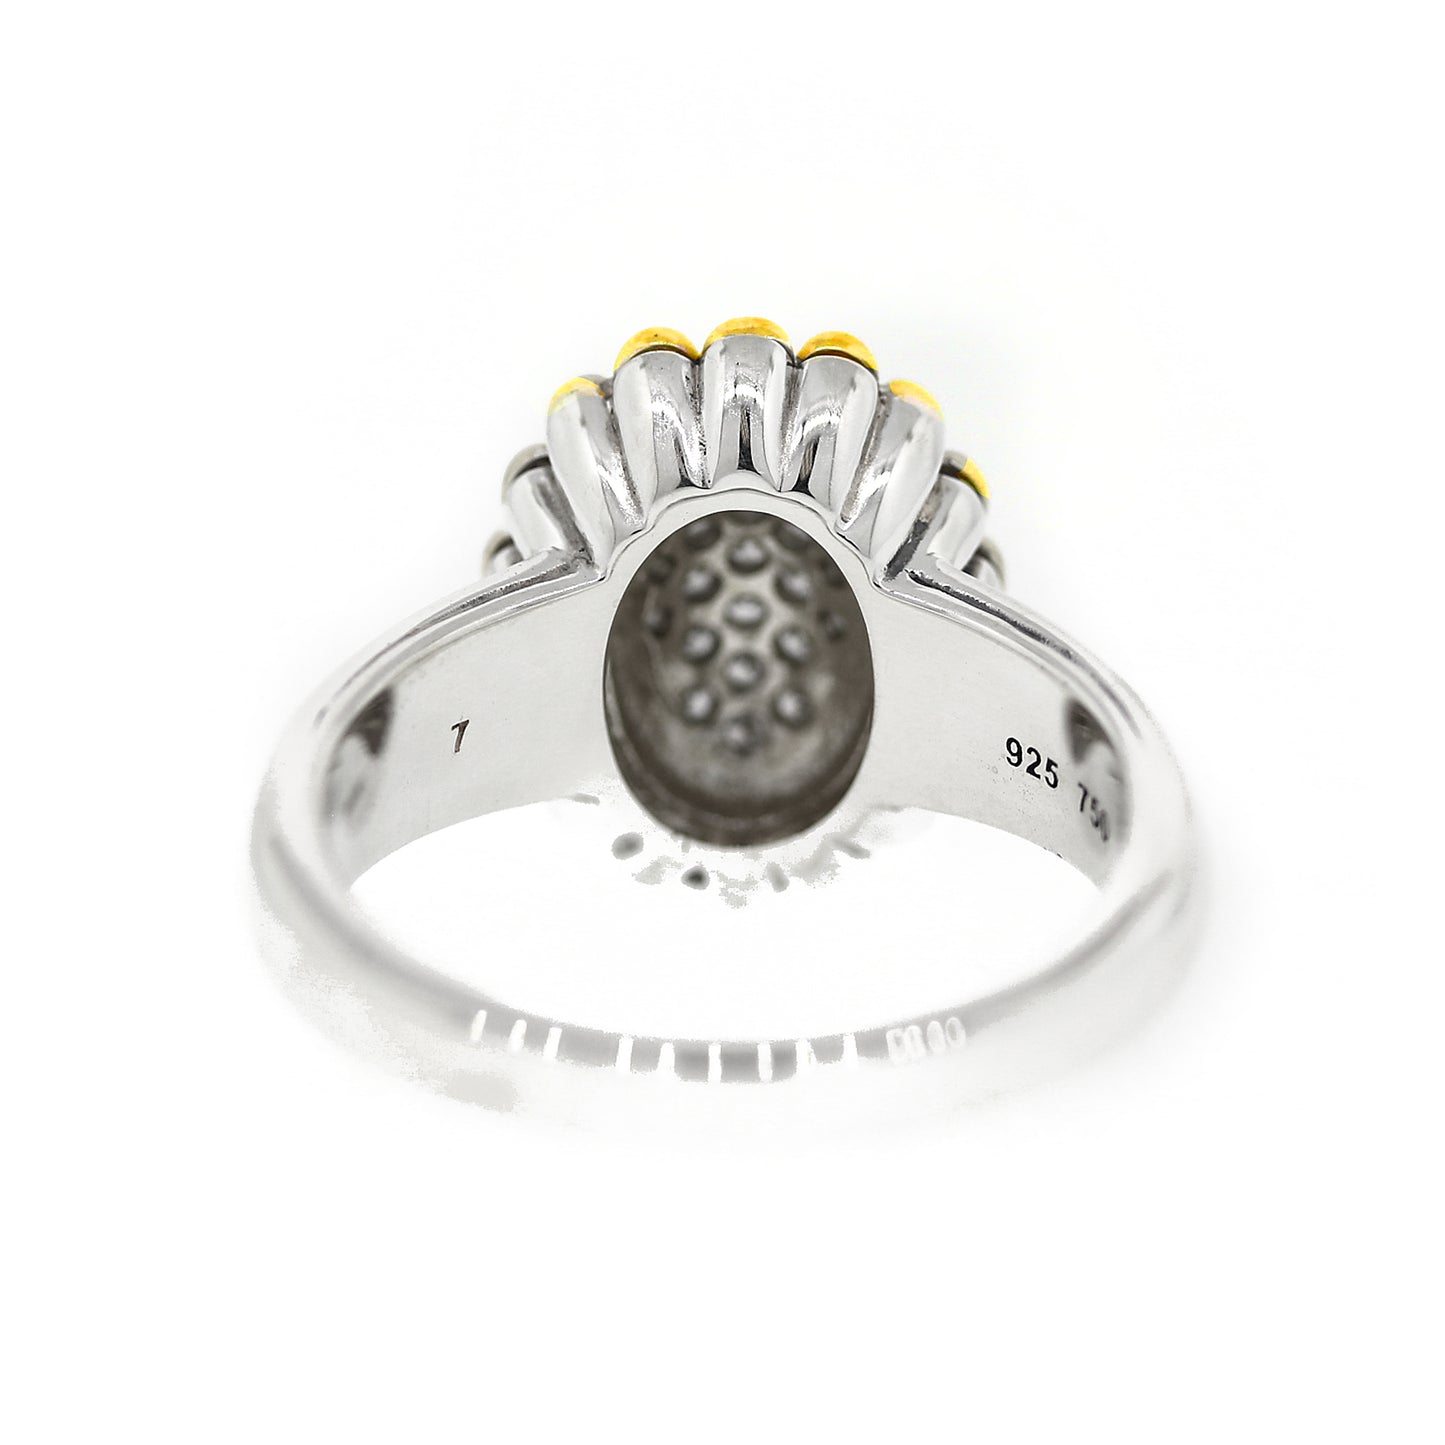 Lagos Pave Diamond Ring, Silver and 18k Yellow Gold